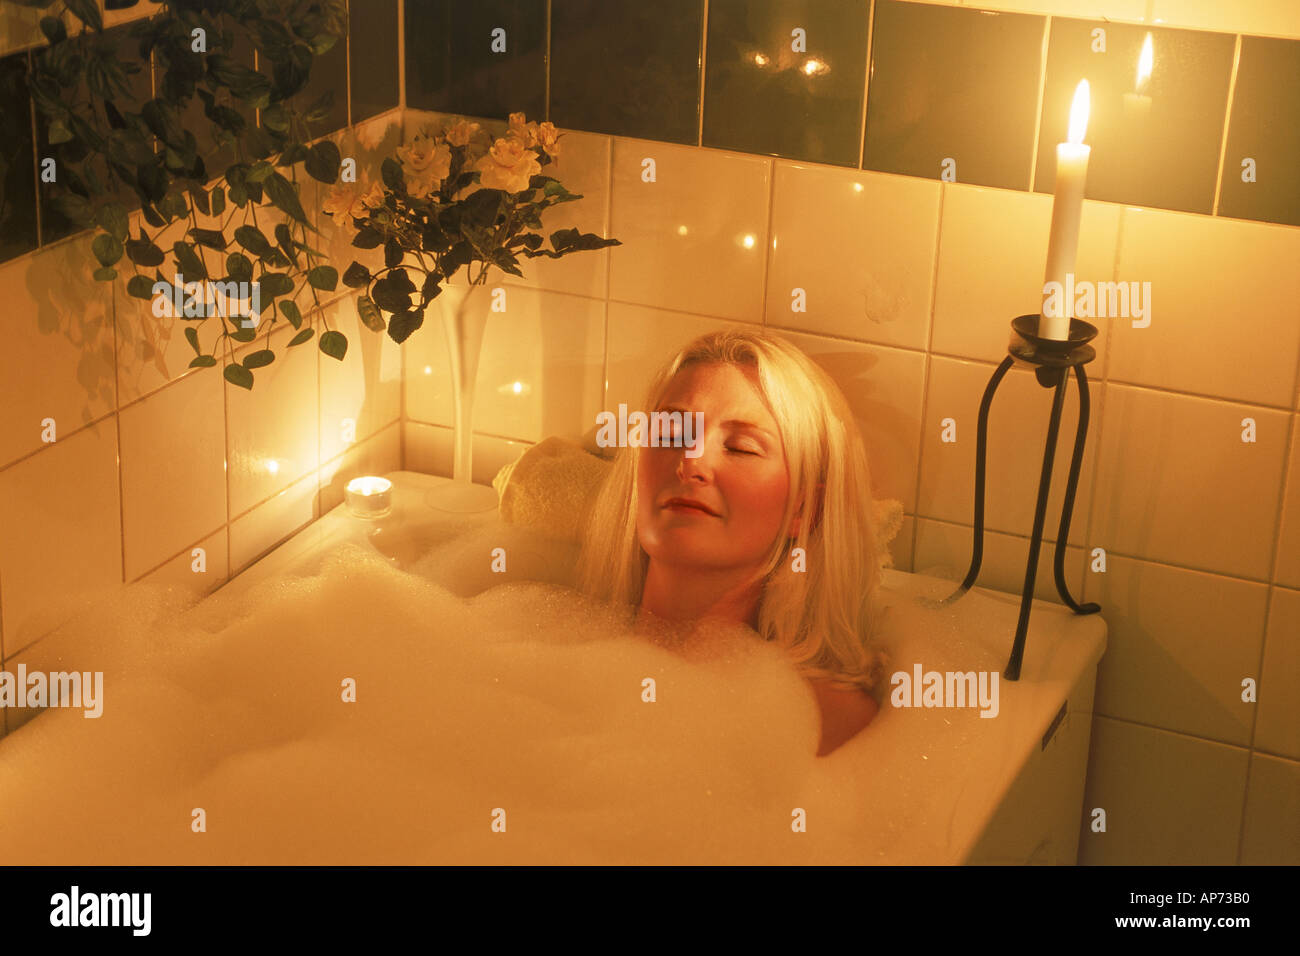 Women soaking in bathtub with bubbles and candles Stock Photo